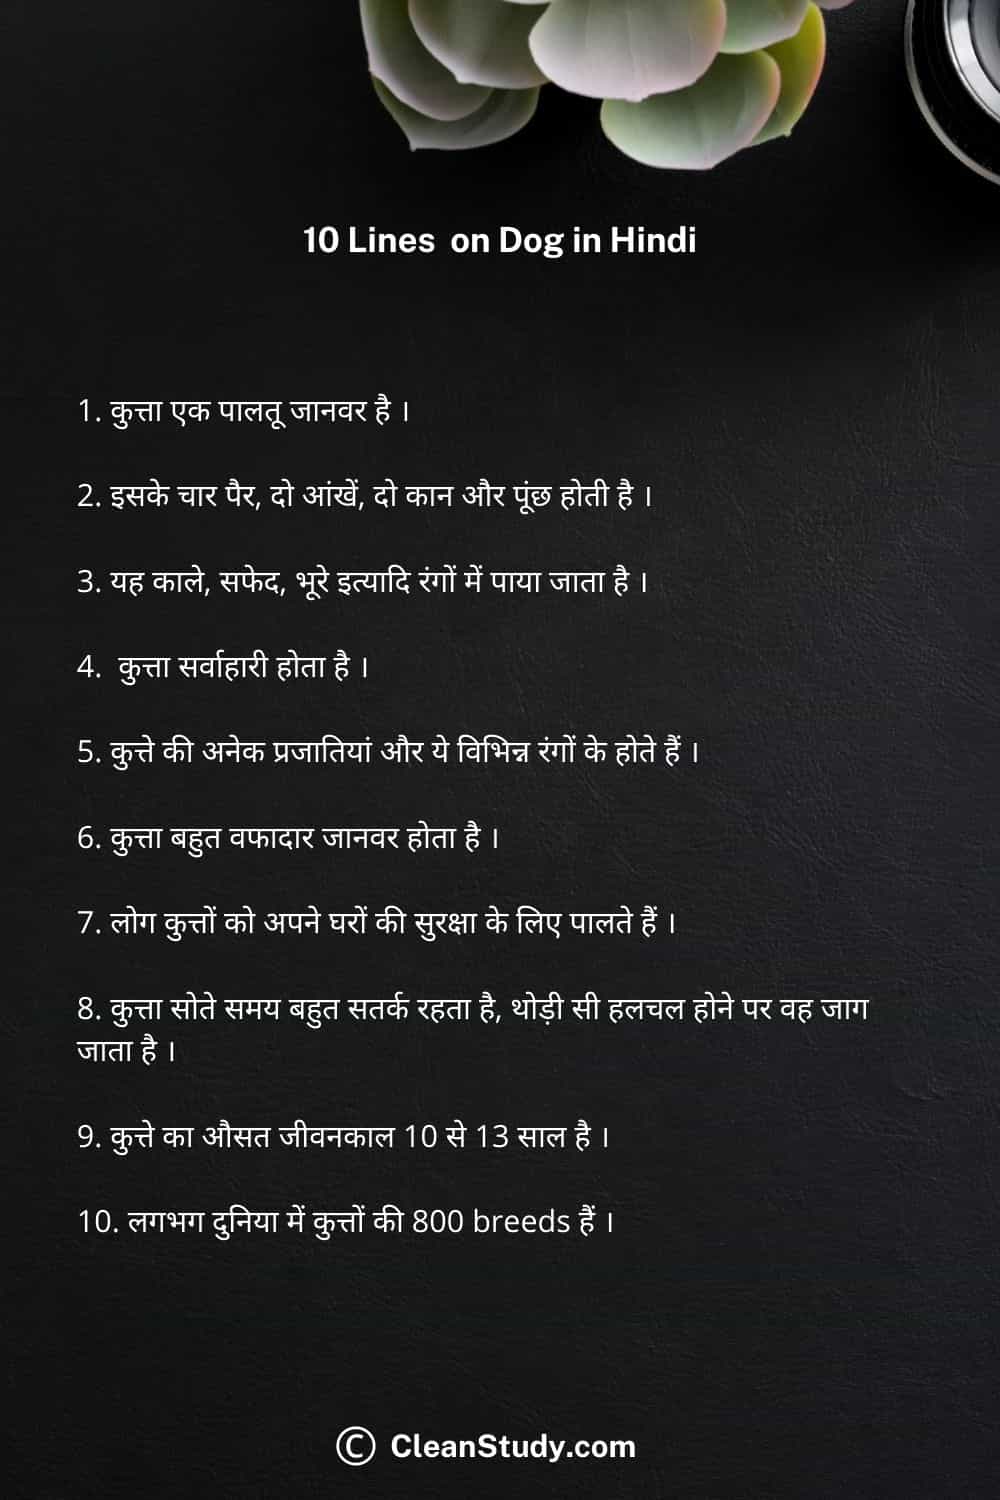 10 lines on dog in hindi